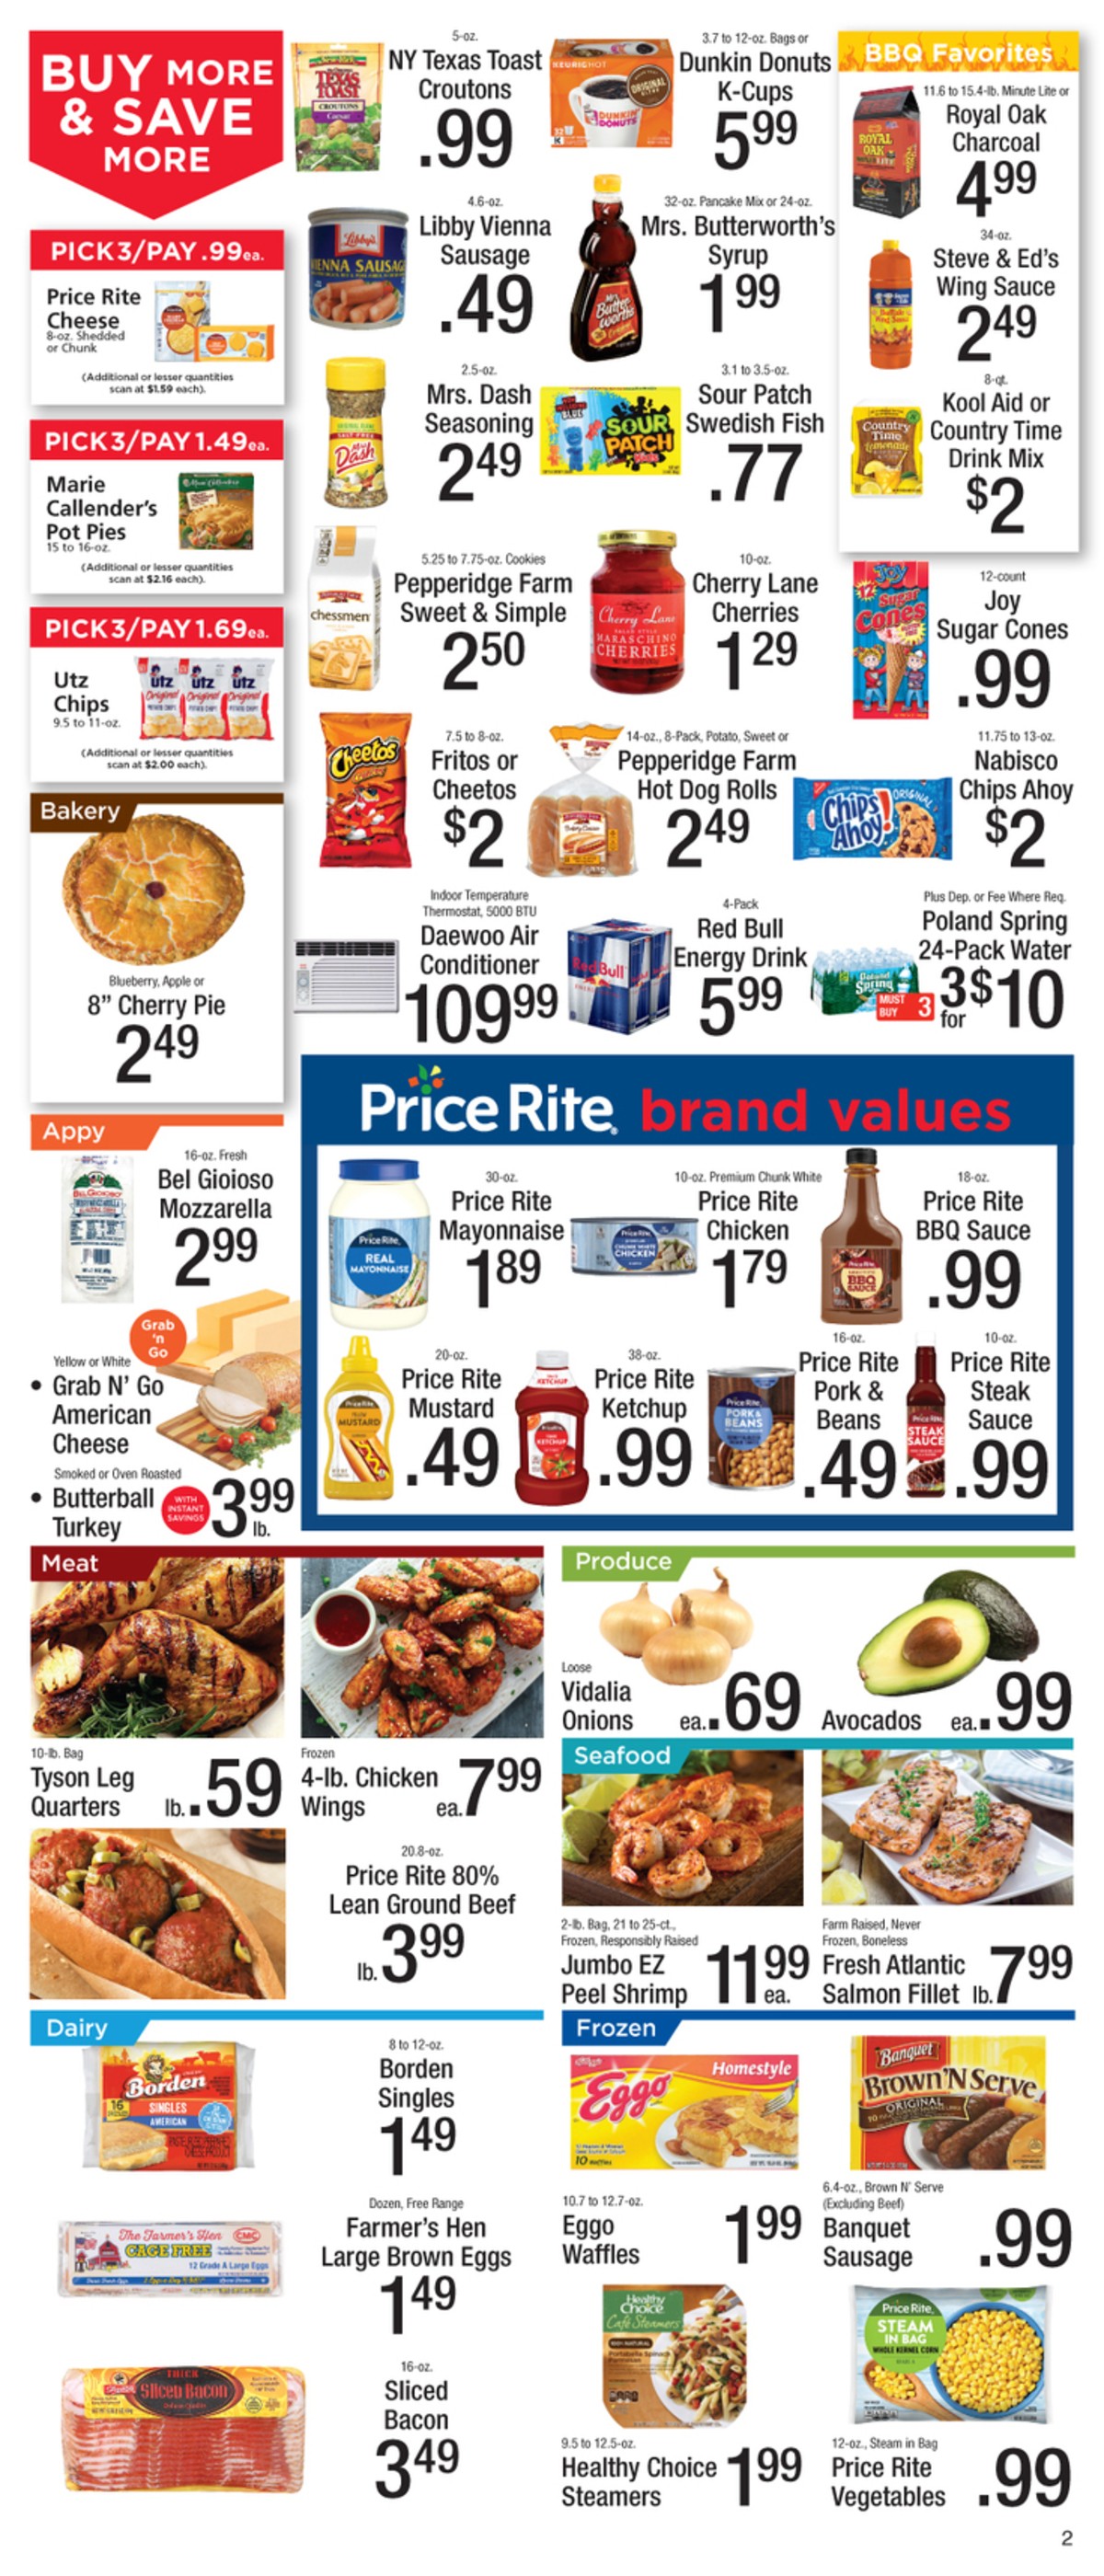 Price Rite Weekly Ad from May 17